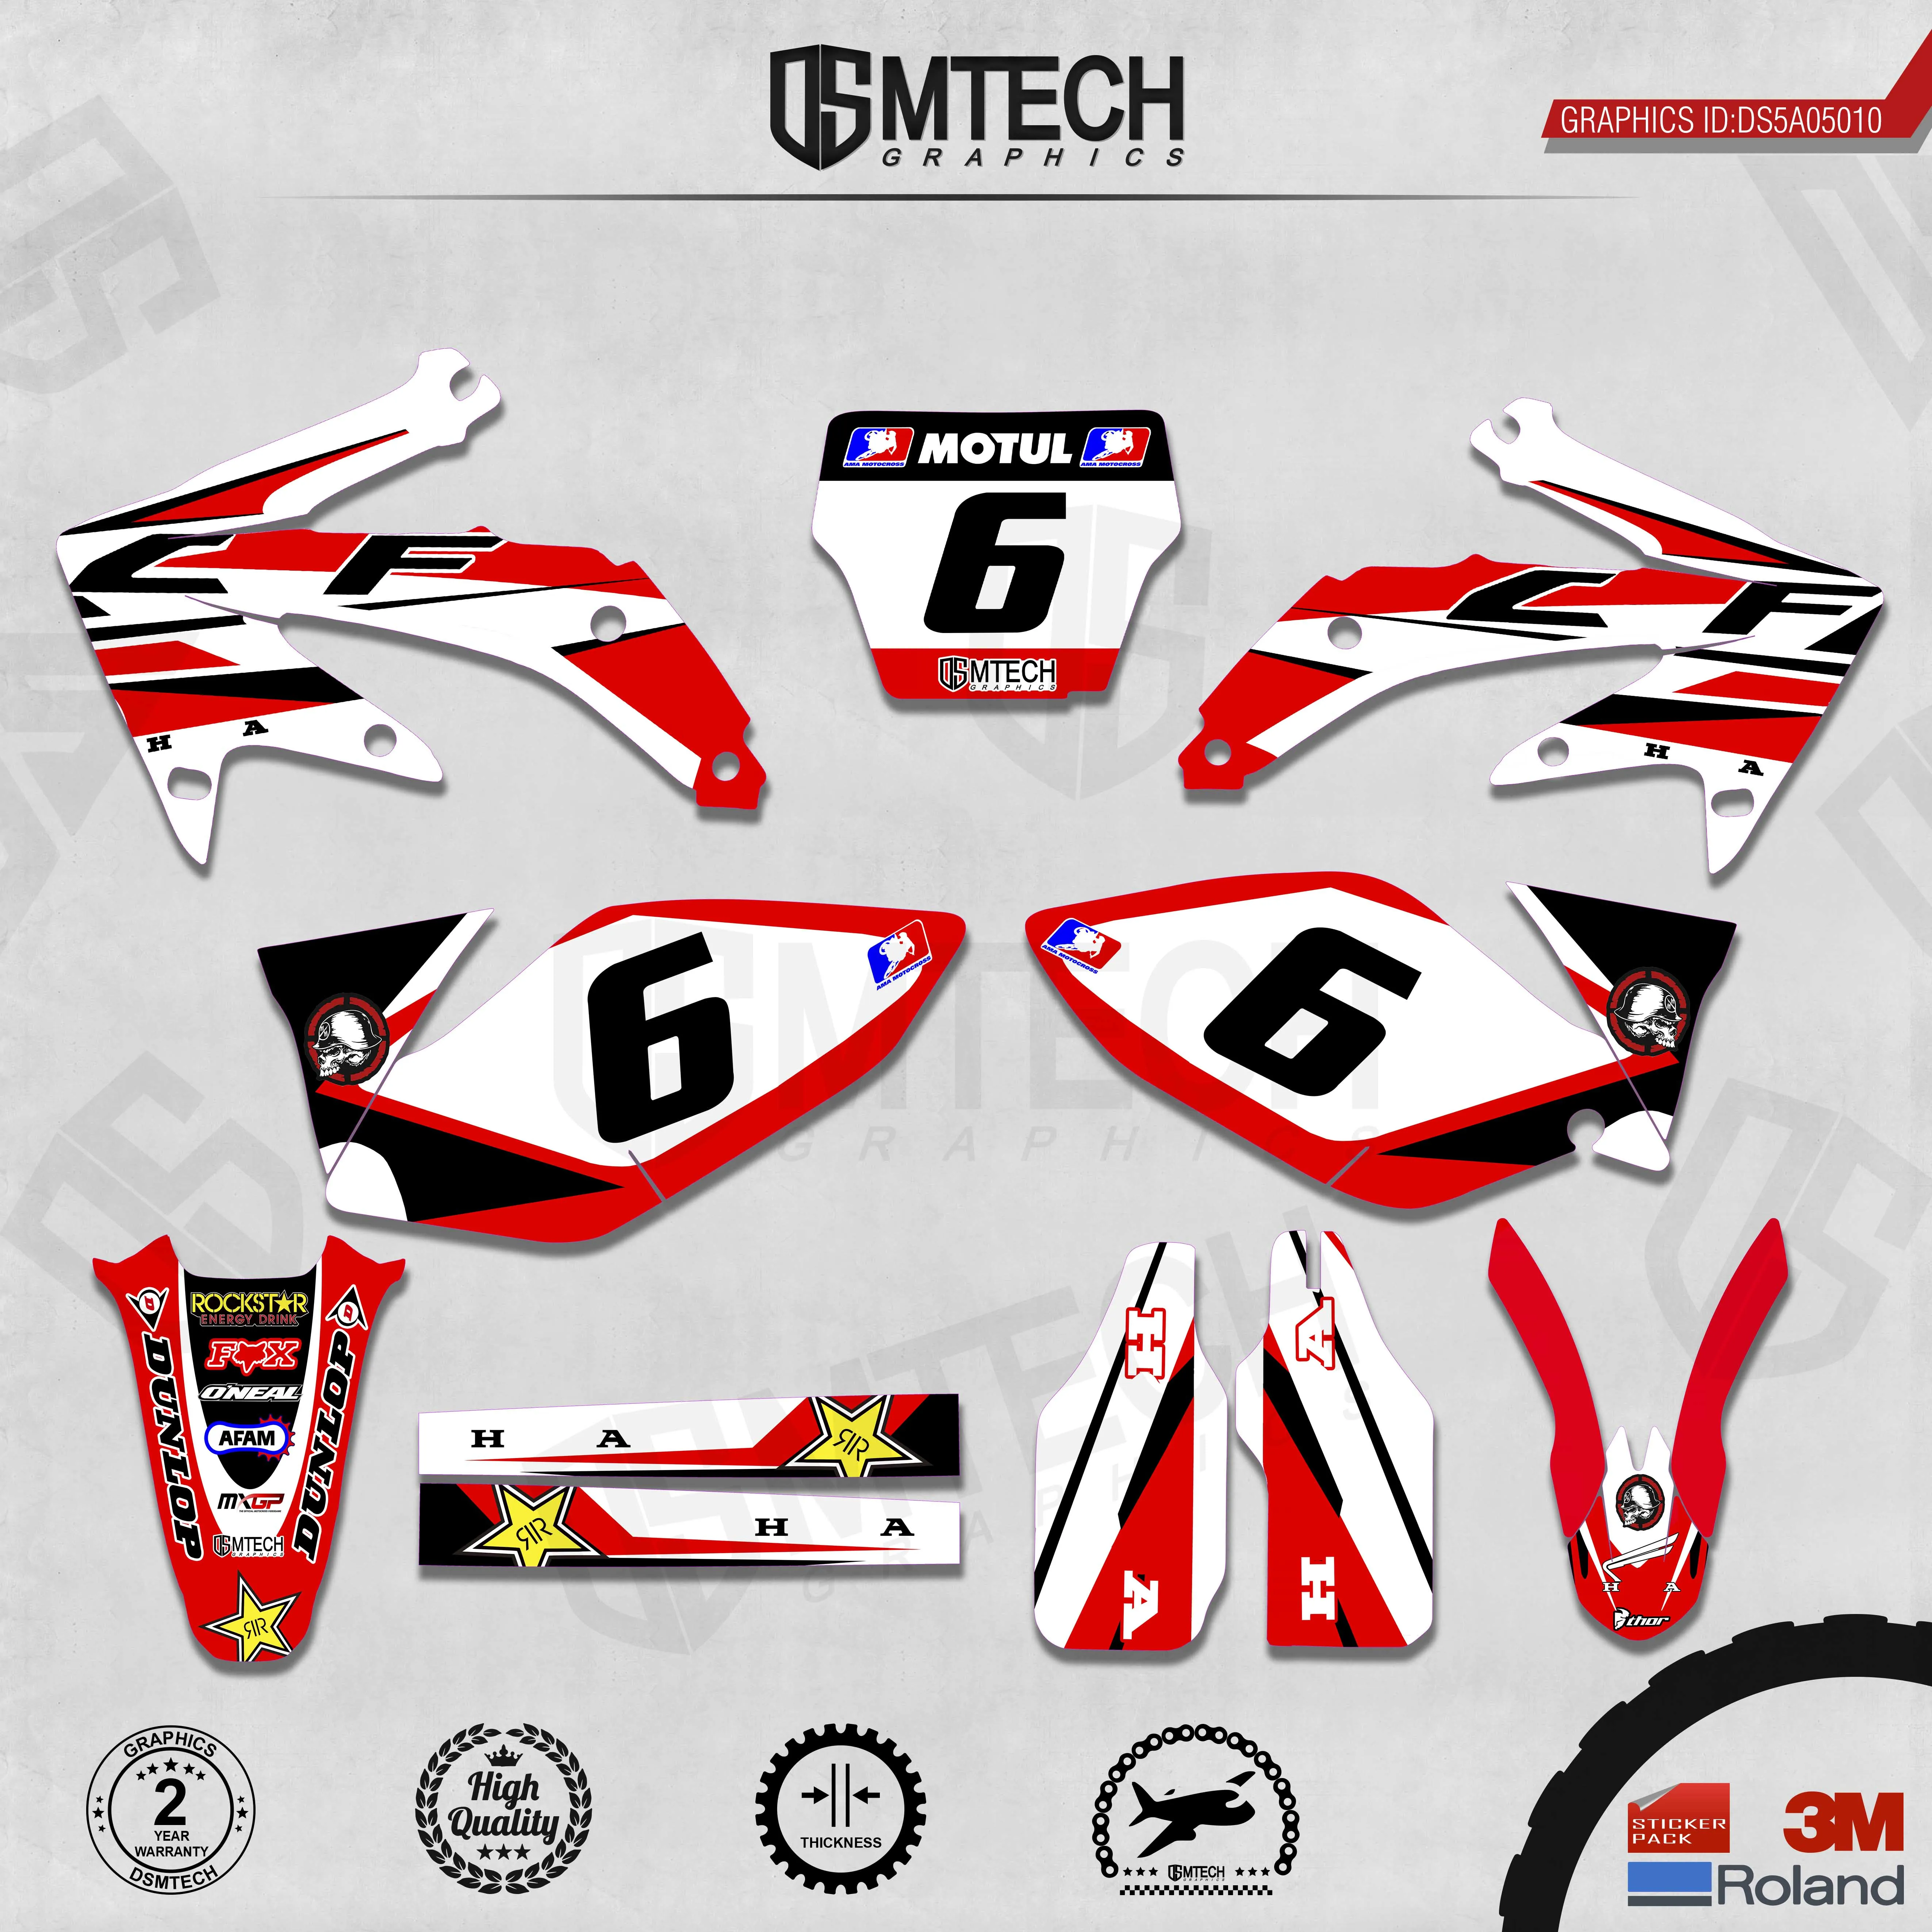 DSMTECH Customized Team Graphics Backgrounds Decals 3M Custom Stickers For 2005 2006 2007 2008  CRF450R 010